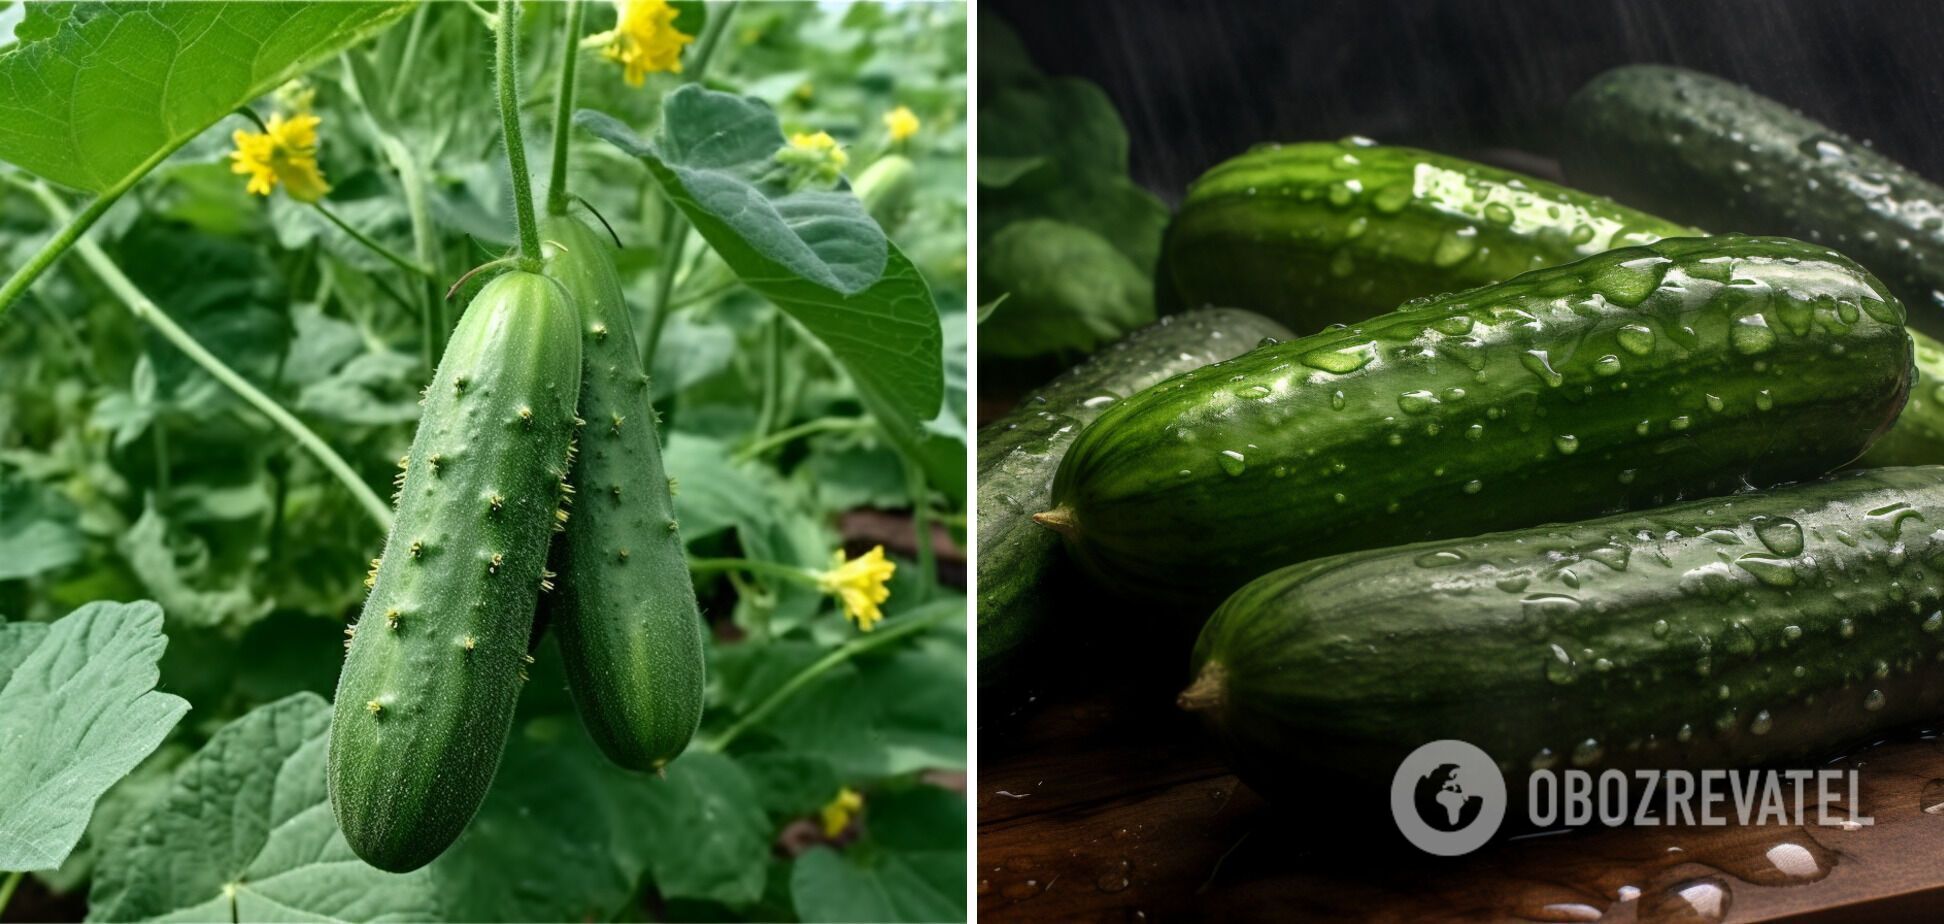 What not to plant next to zucchini: the vegetable will grow poorly and deteriorate